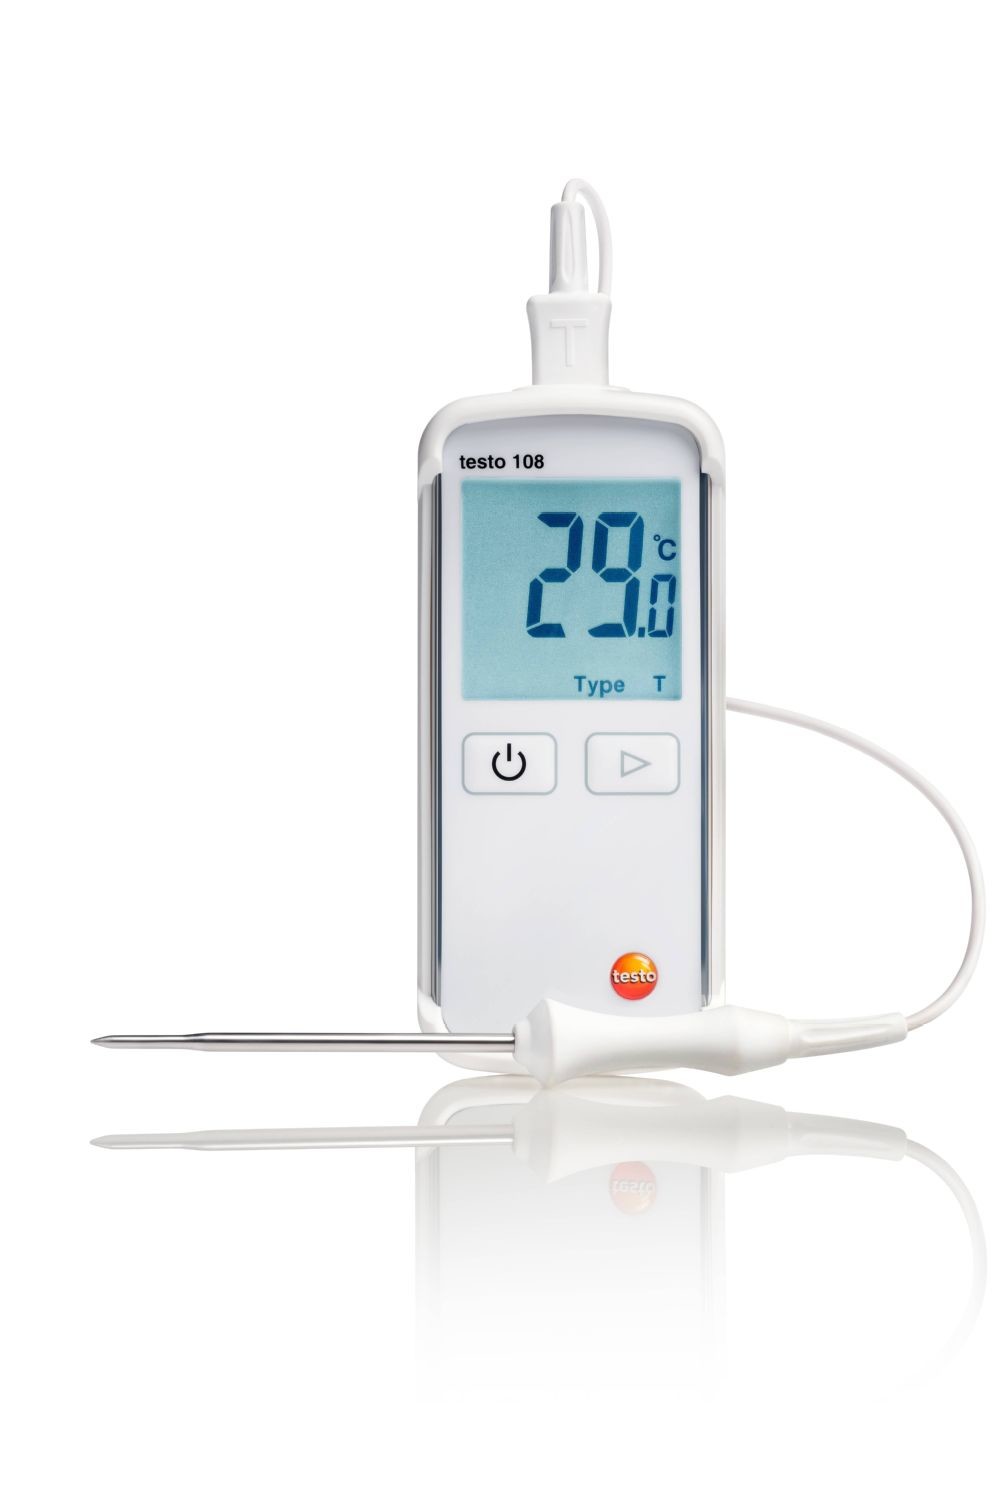 Buy cheap Testo 108 - Digital food thermometer Order-Nr. 0563 1080 Temperature measurement with very competitive price On sale from wholesalers